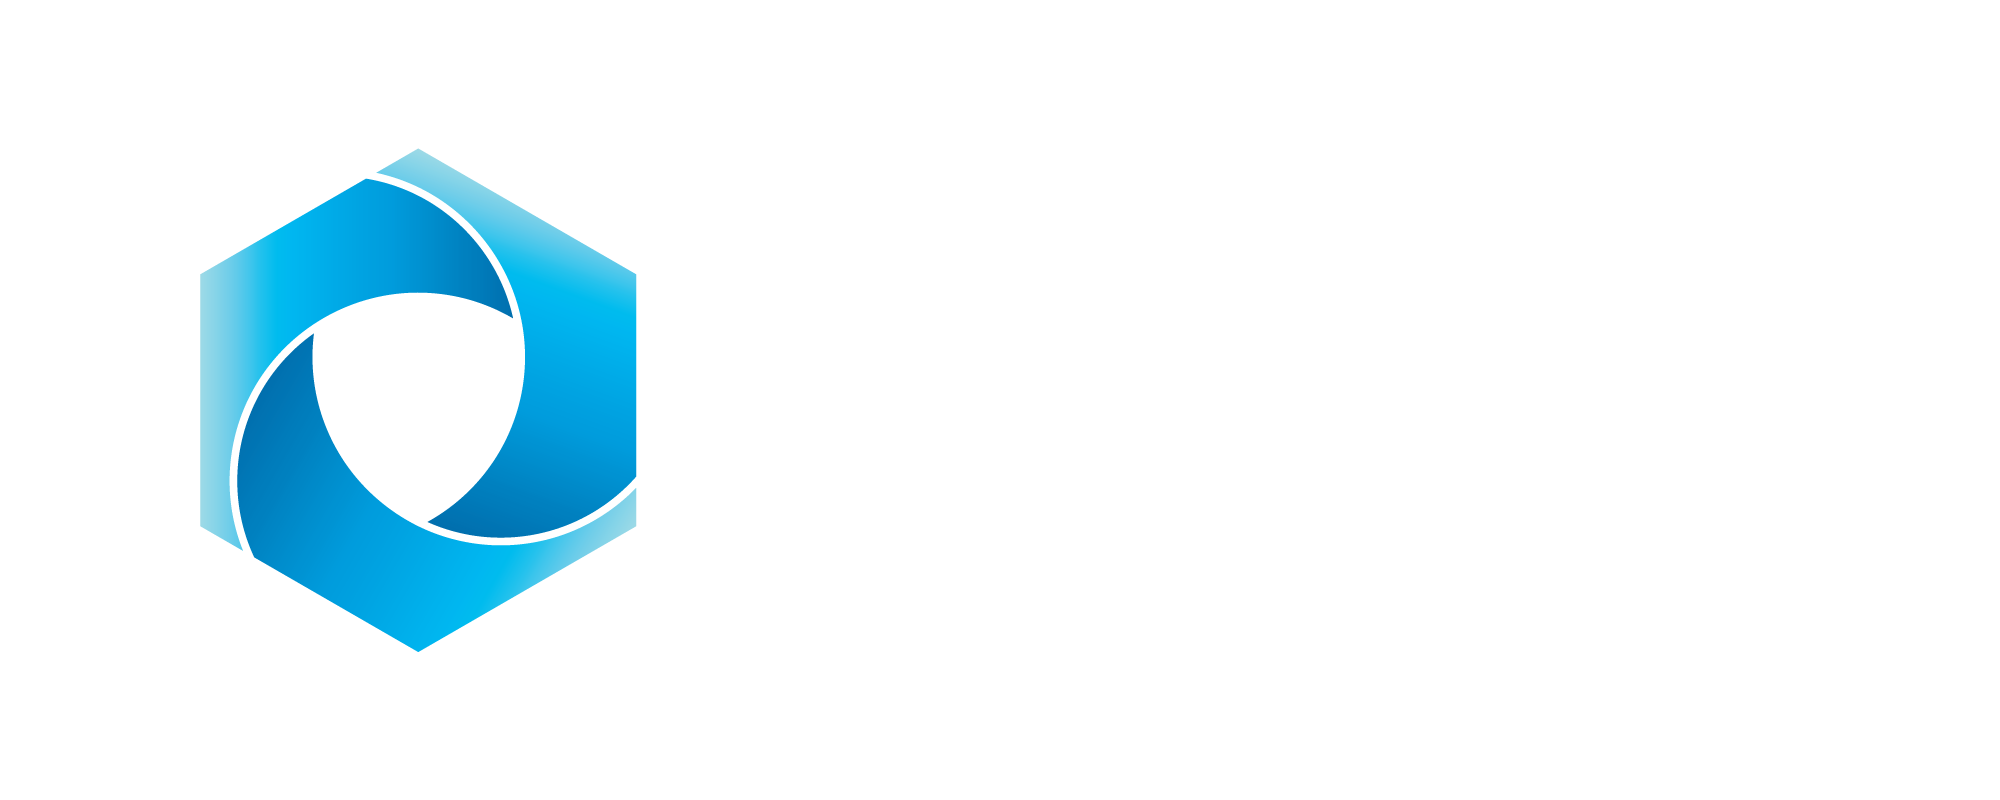 Center for Secure and Intelligent Critical Systems